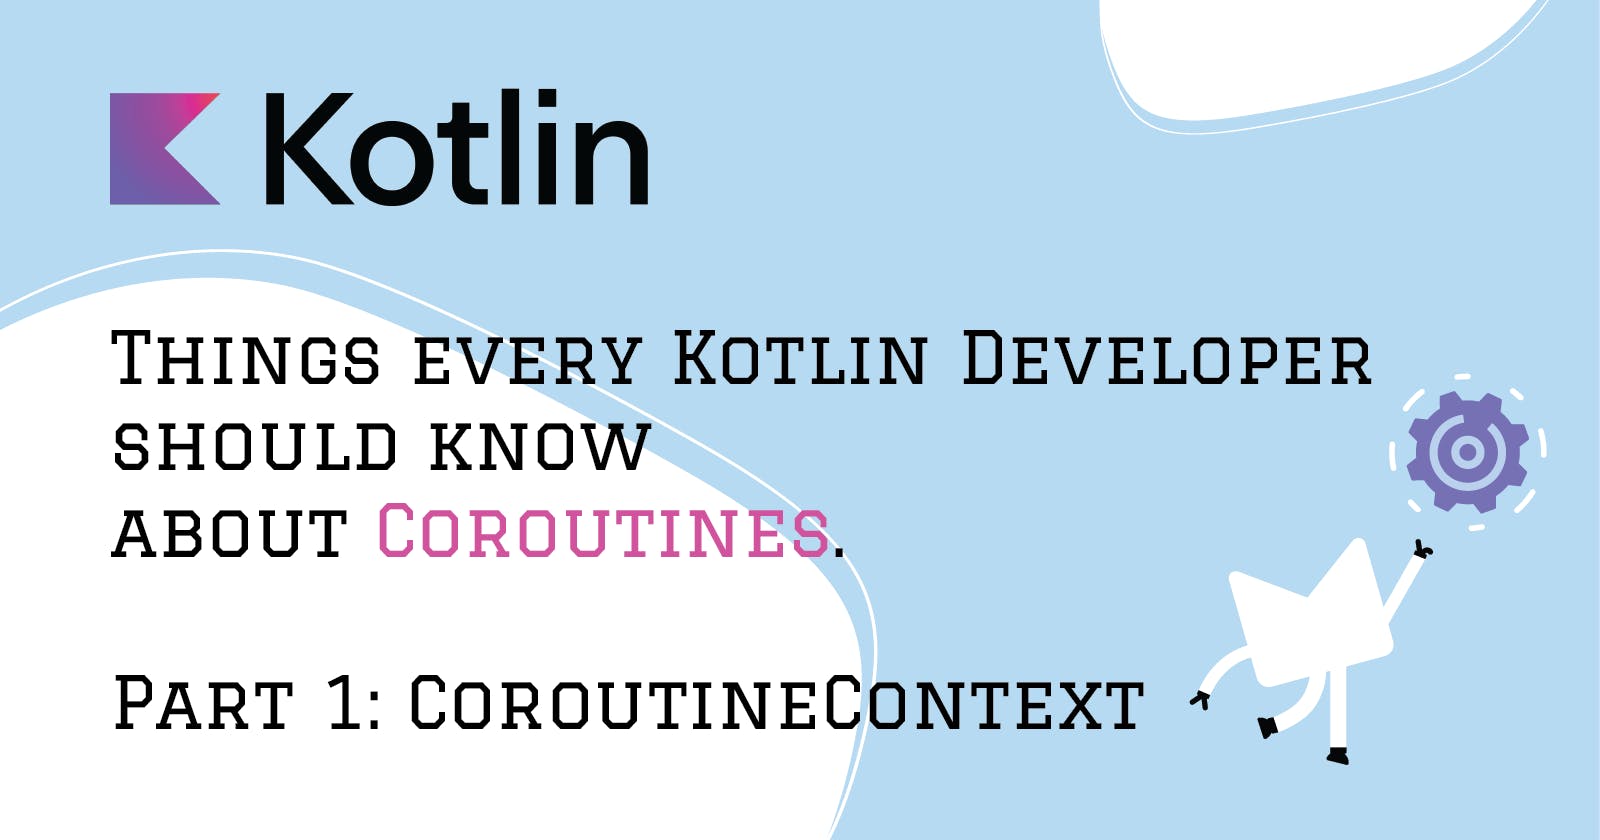 Things every Kotlin Developer should know about Coroutines. 

Part 1: CoroutineContext.